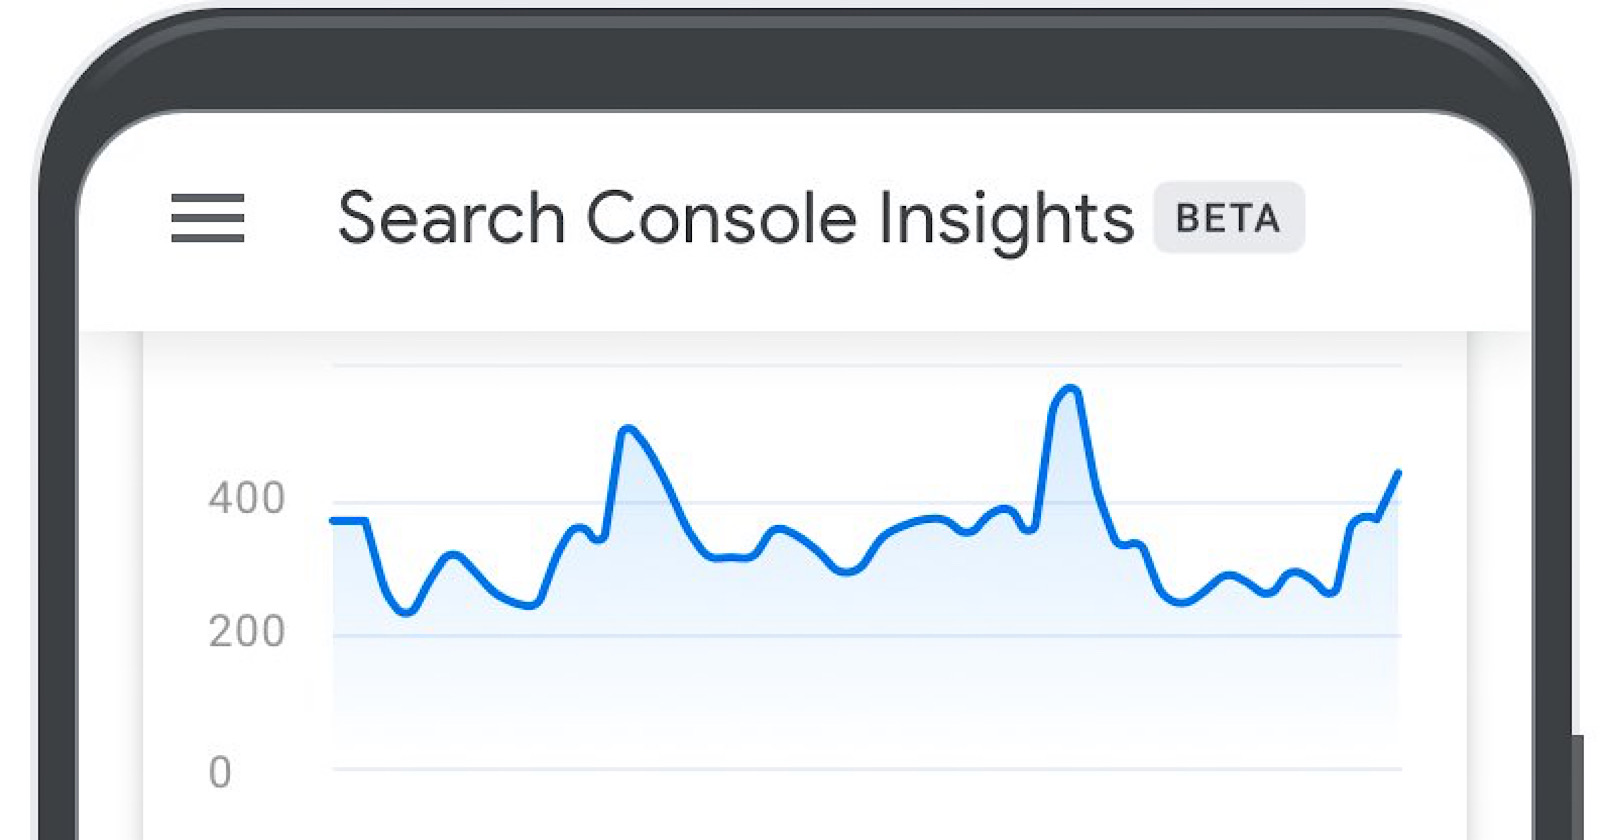 search console insights